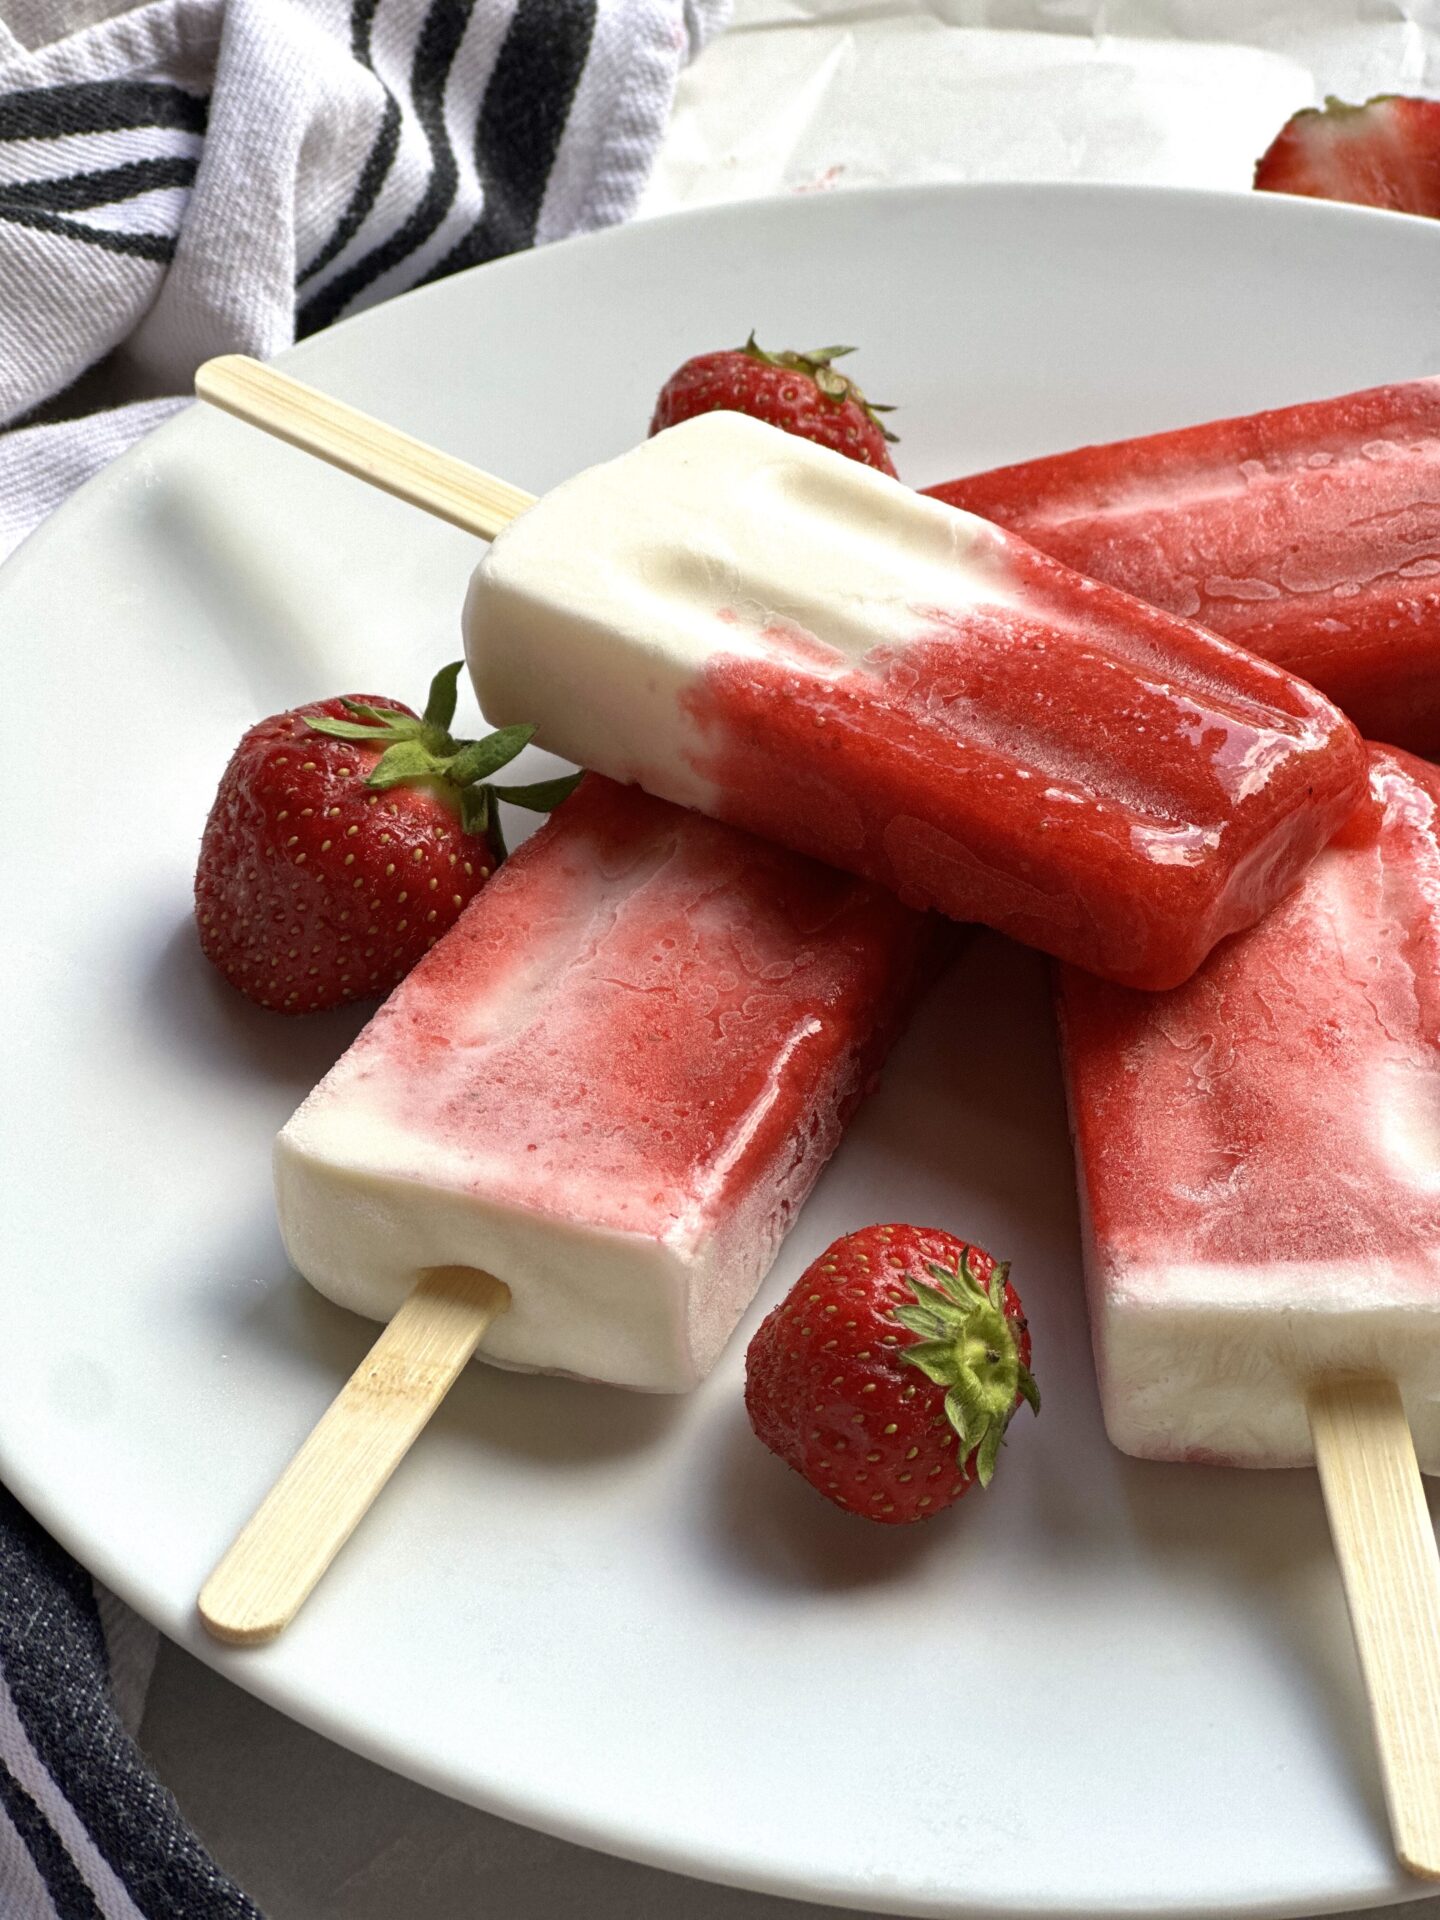 Plate of strawberries and cream breakfast popsicles seen from the side, surrounded by fresh strawberries